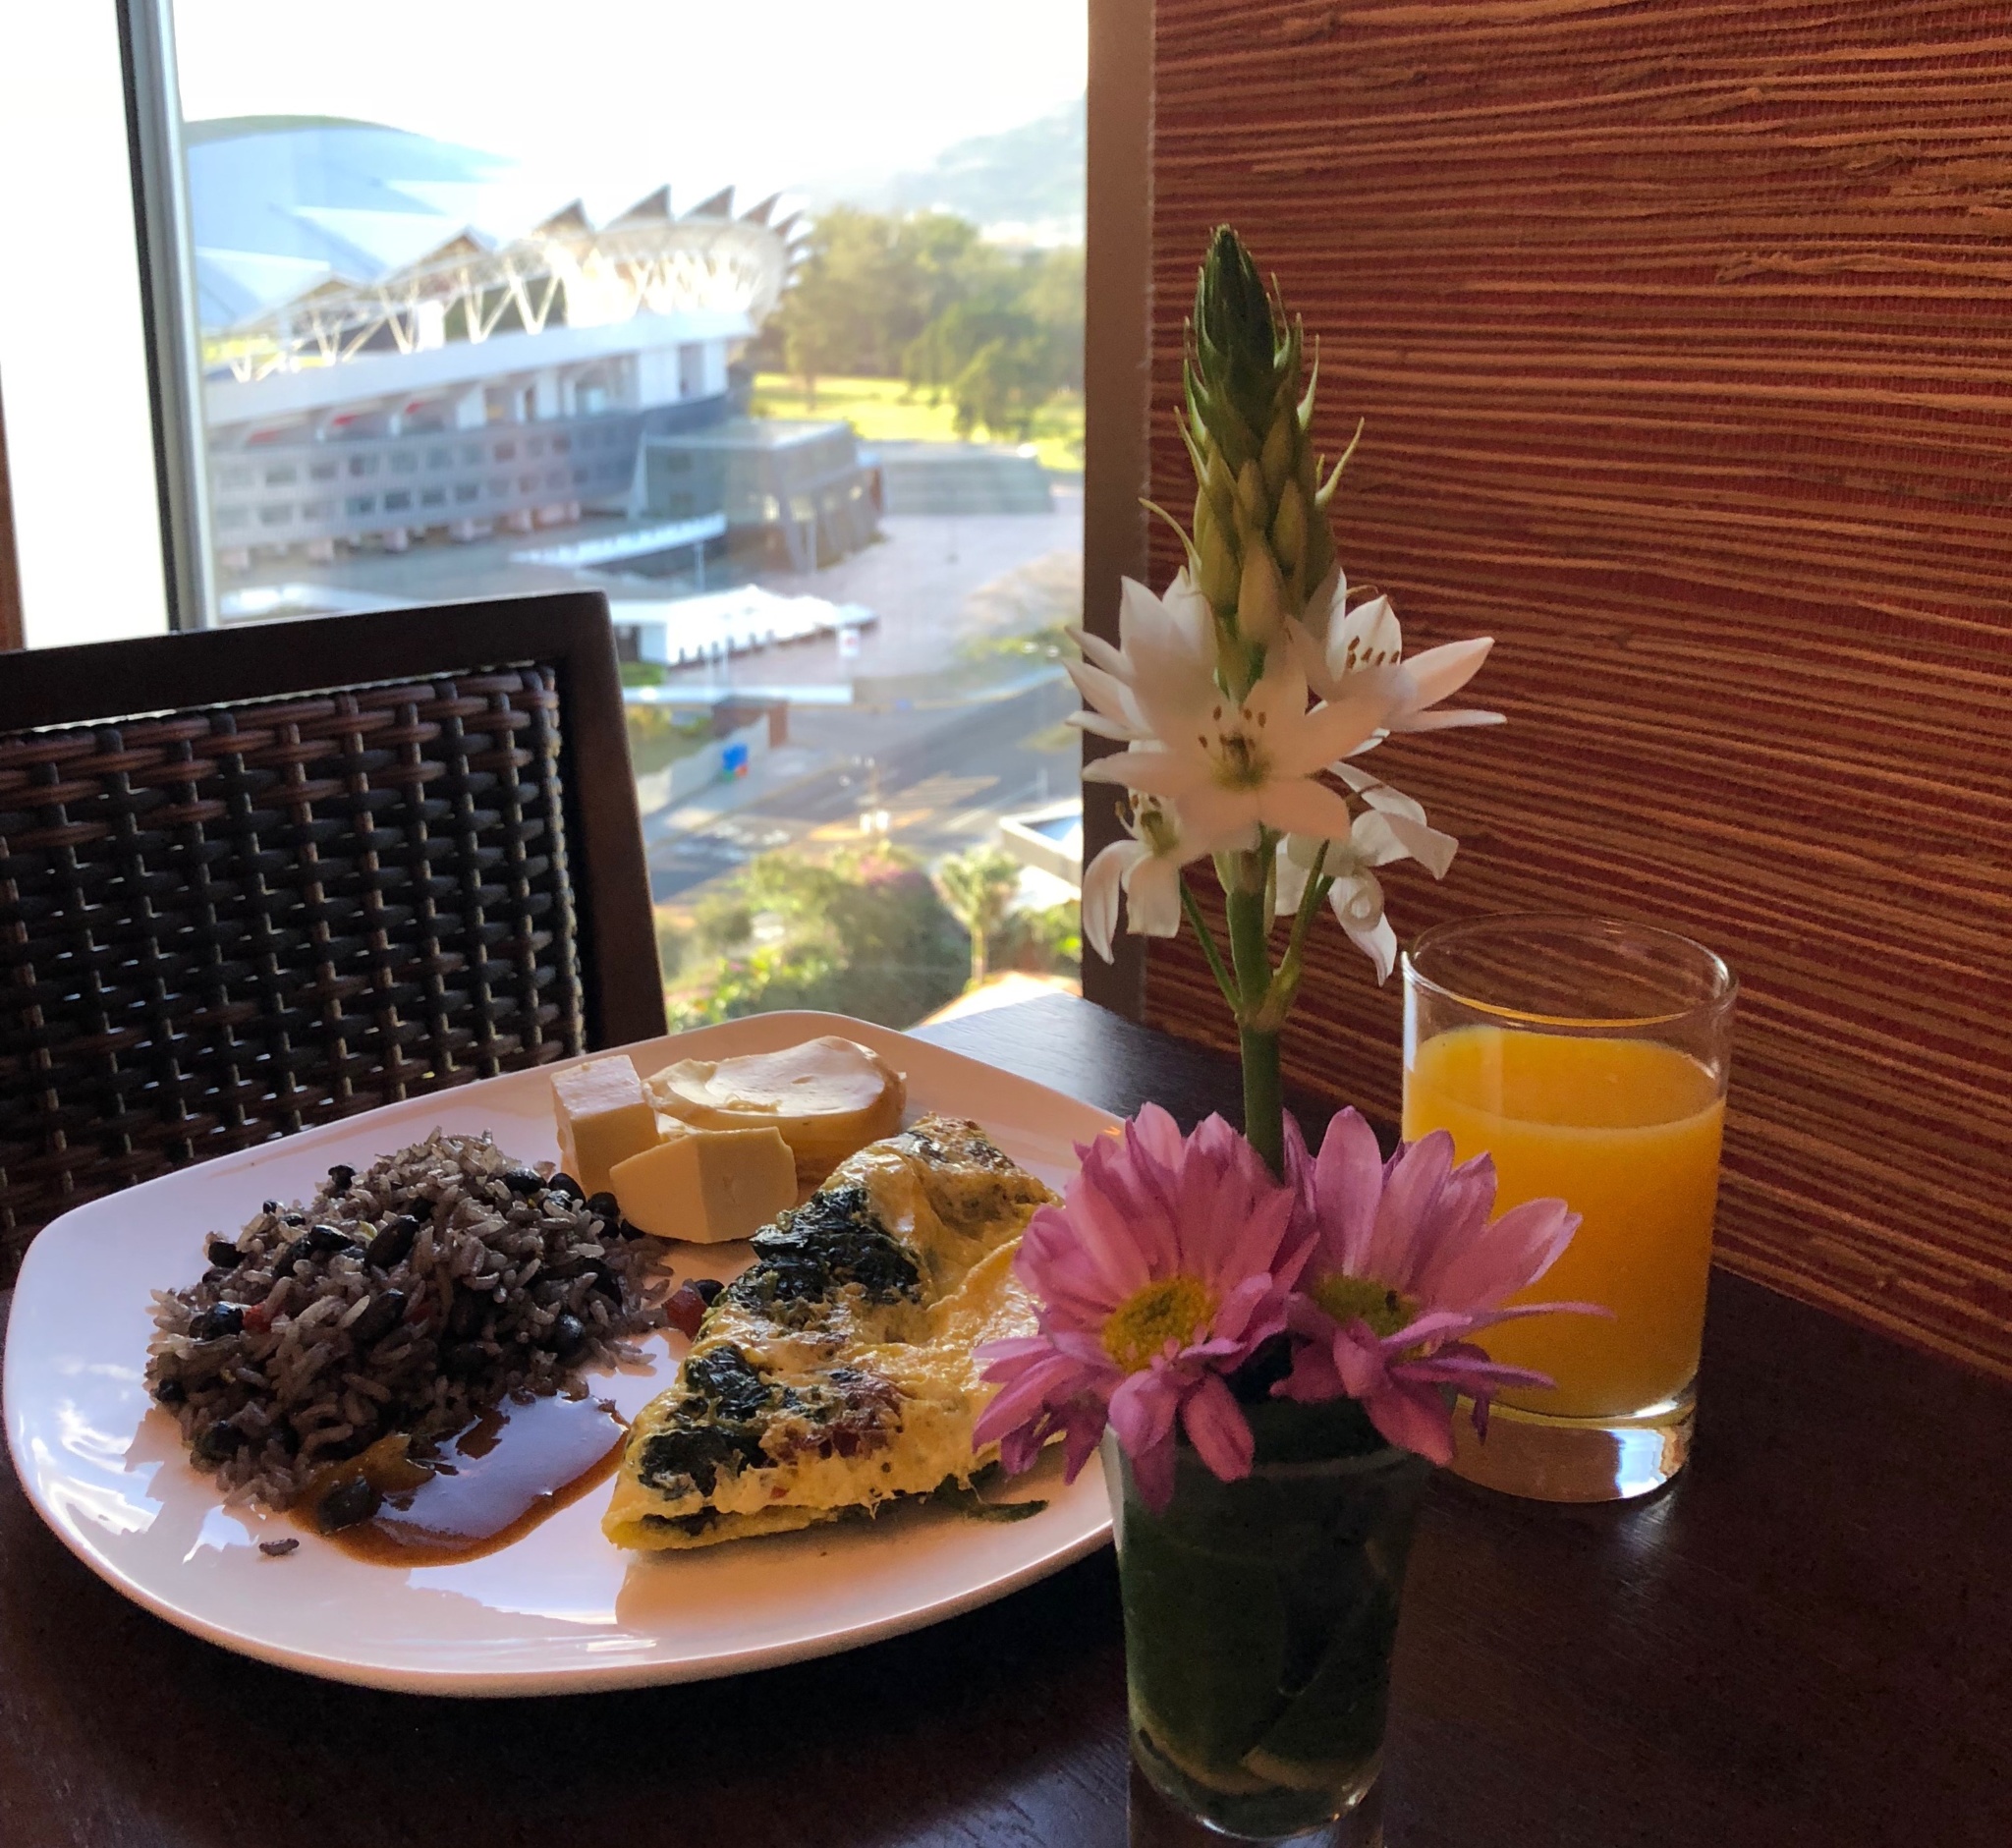 A traditional Costa Rican breakfast with Gallo Pinto and salsa Lizano